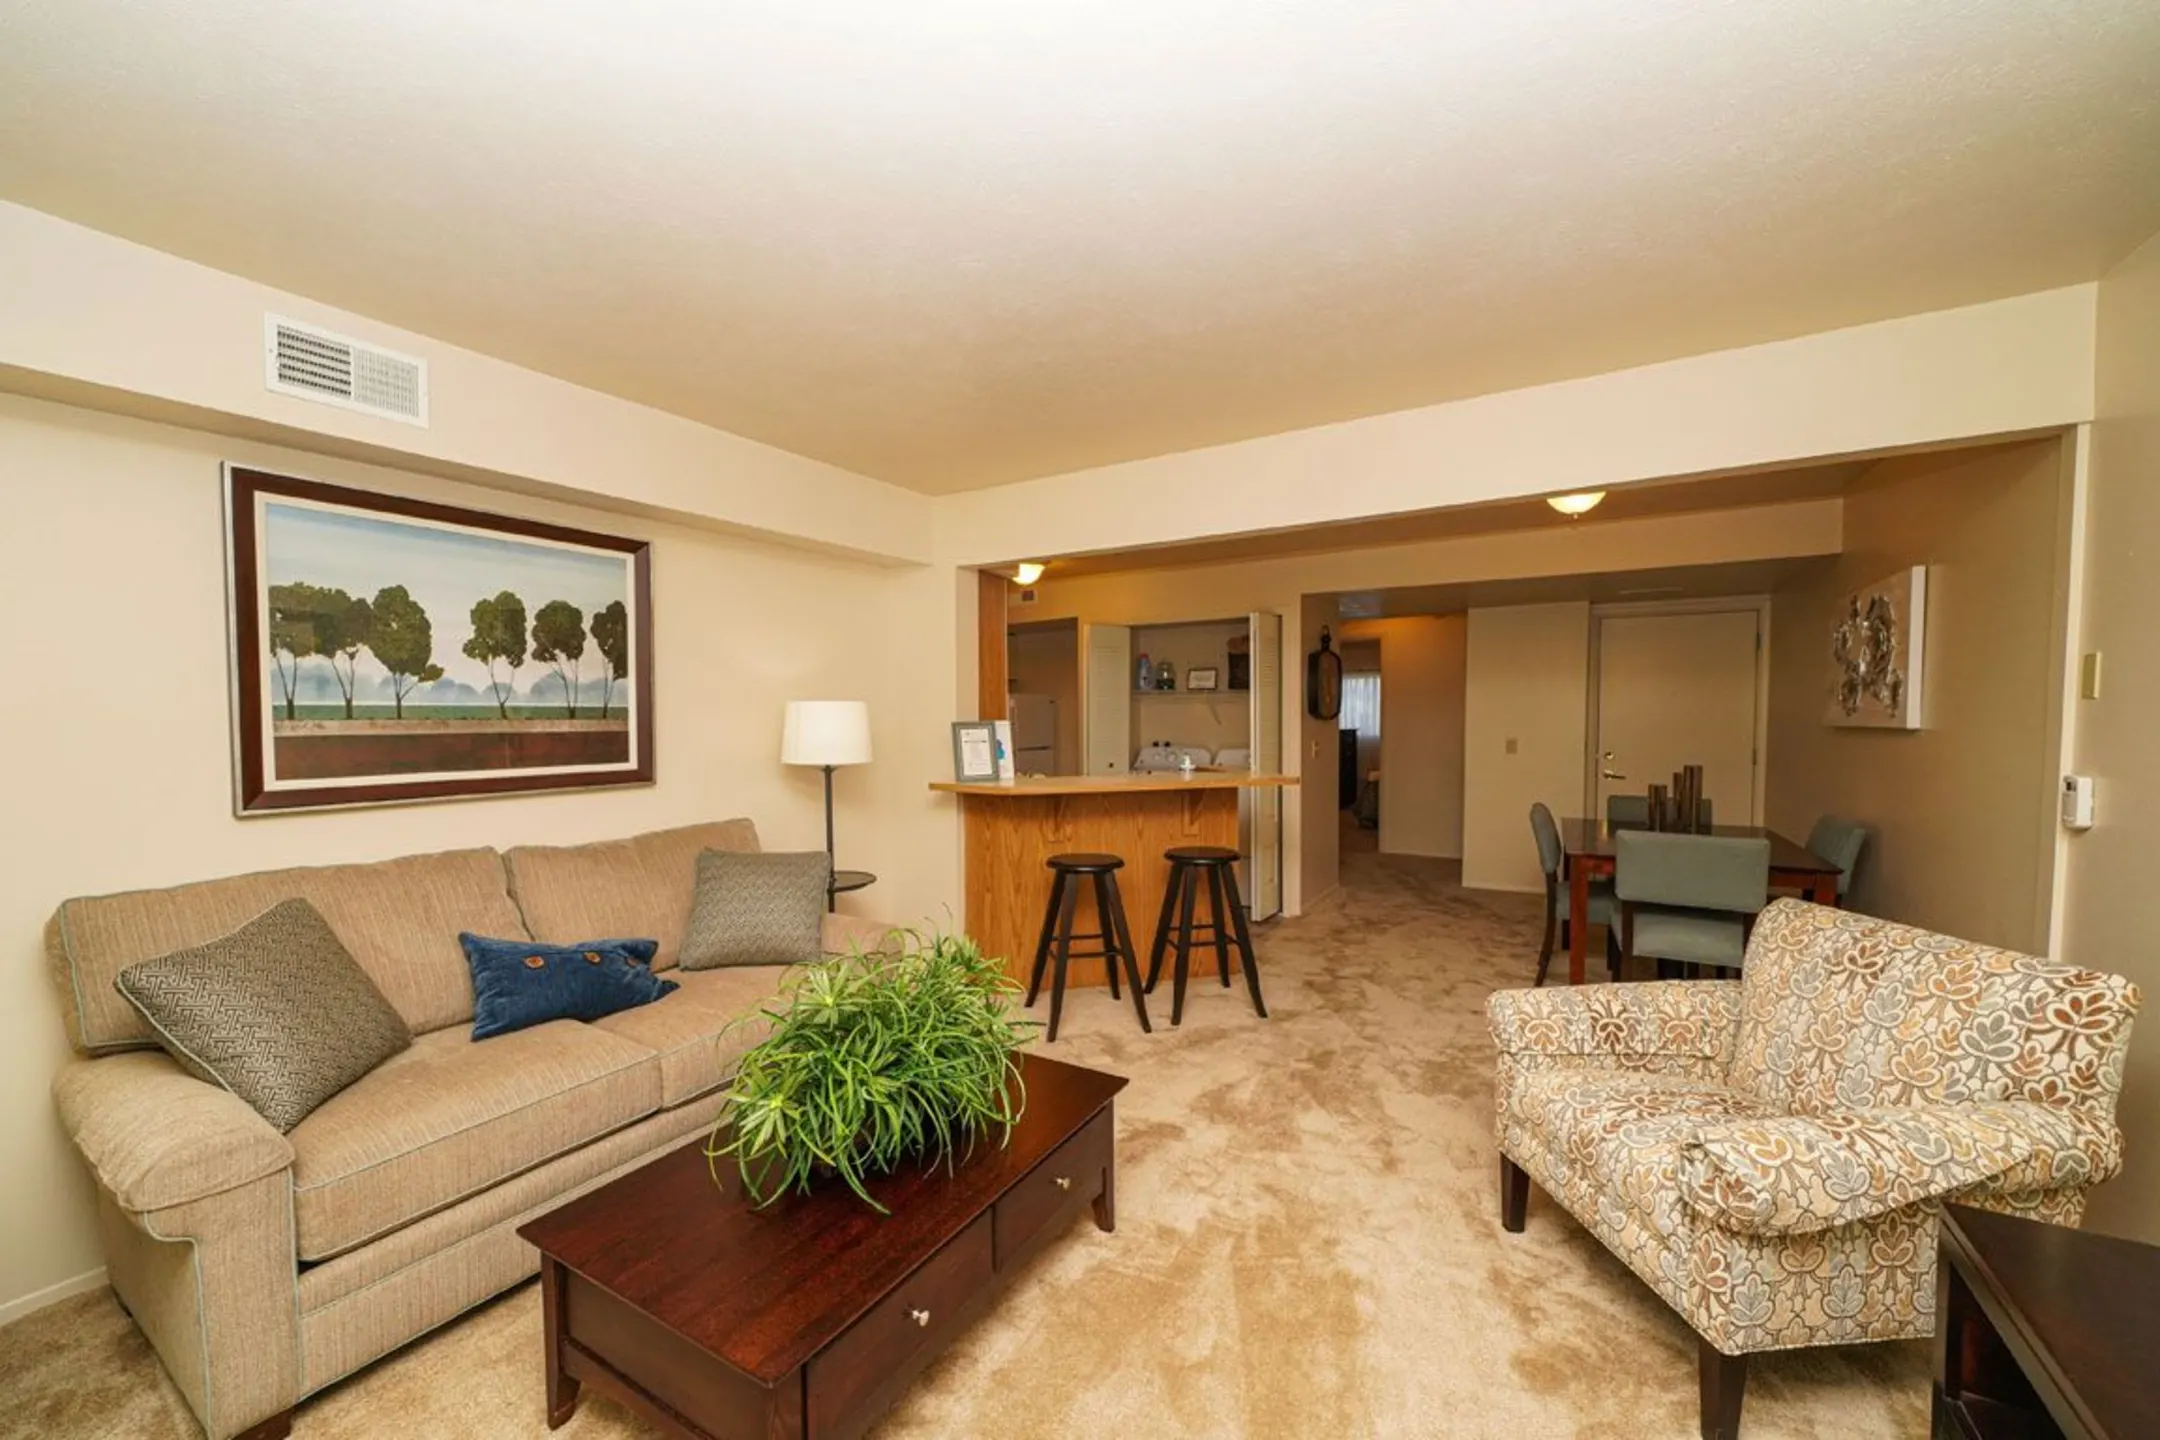 Living Room - Foxwood Apartments & The Hermitage Townhomes - Portage, MI